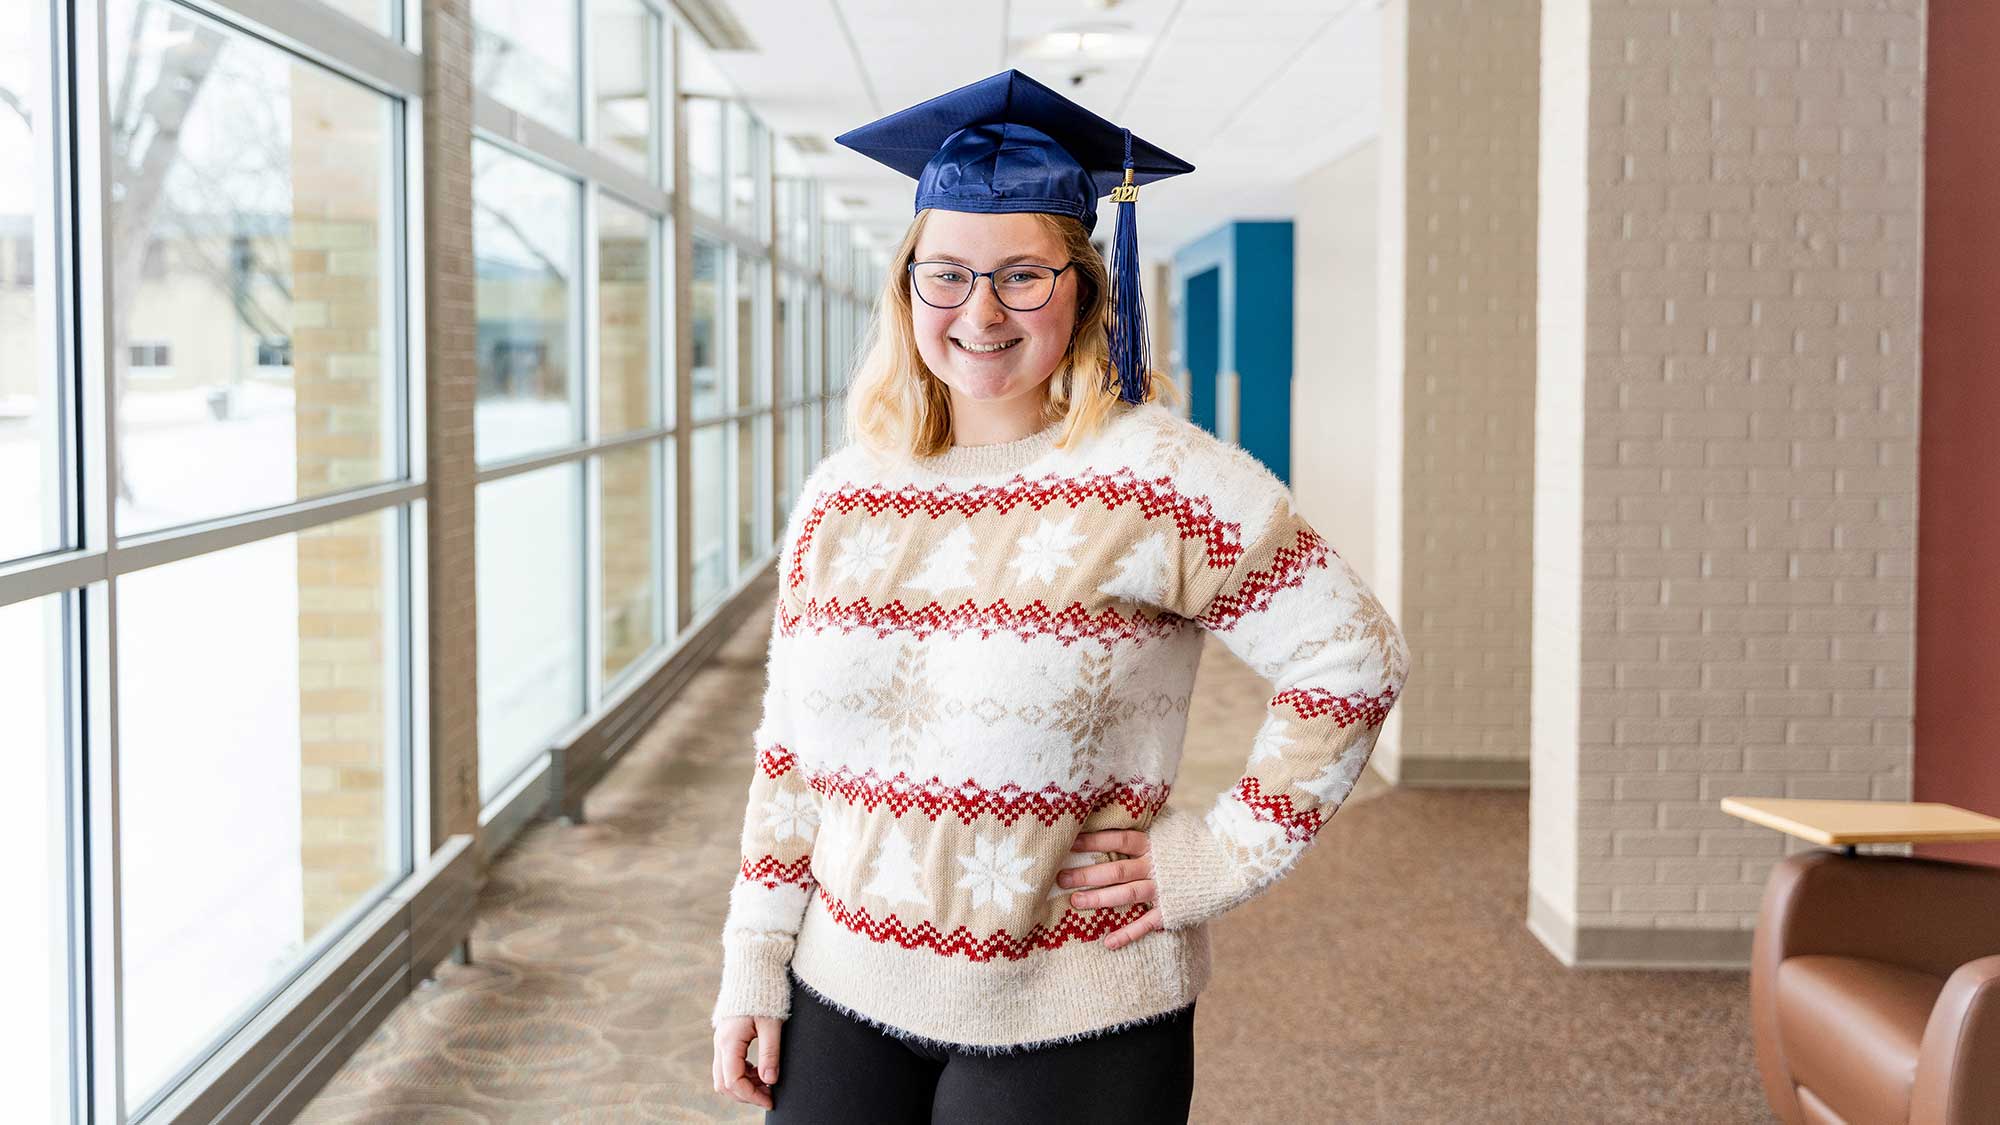 Molly Rydeski standing in an NTC hallway, wearing a festive holiday sweater and a graduation cap.